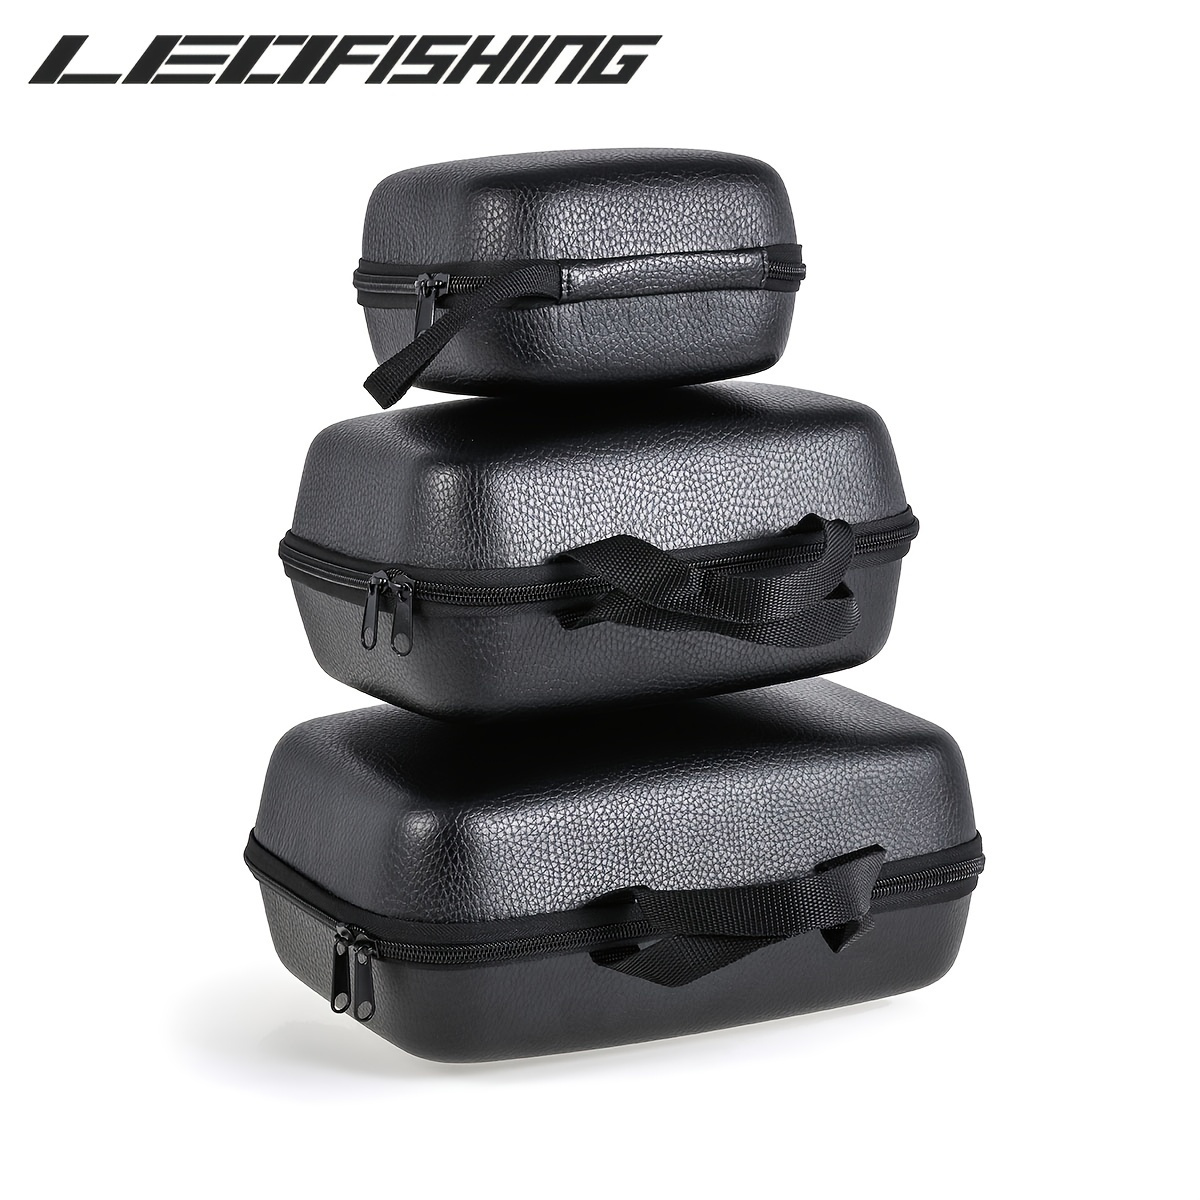 LEOFISHING Fishing Reel Bag - Shockproof and Waterproof Spinning Reel  Protective Cover - Tackle Storage Case for Spinning, Baitcasting, and  Trolling R